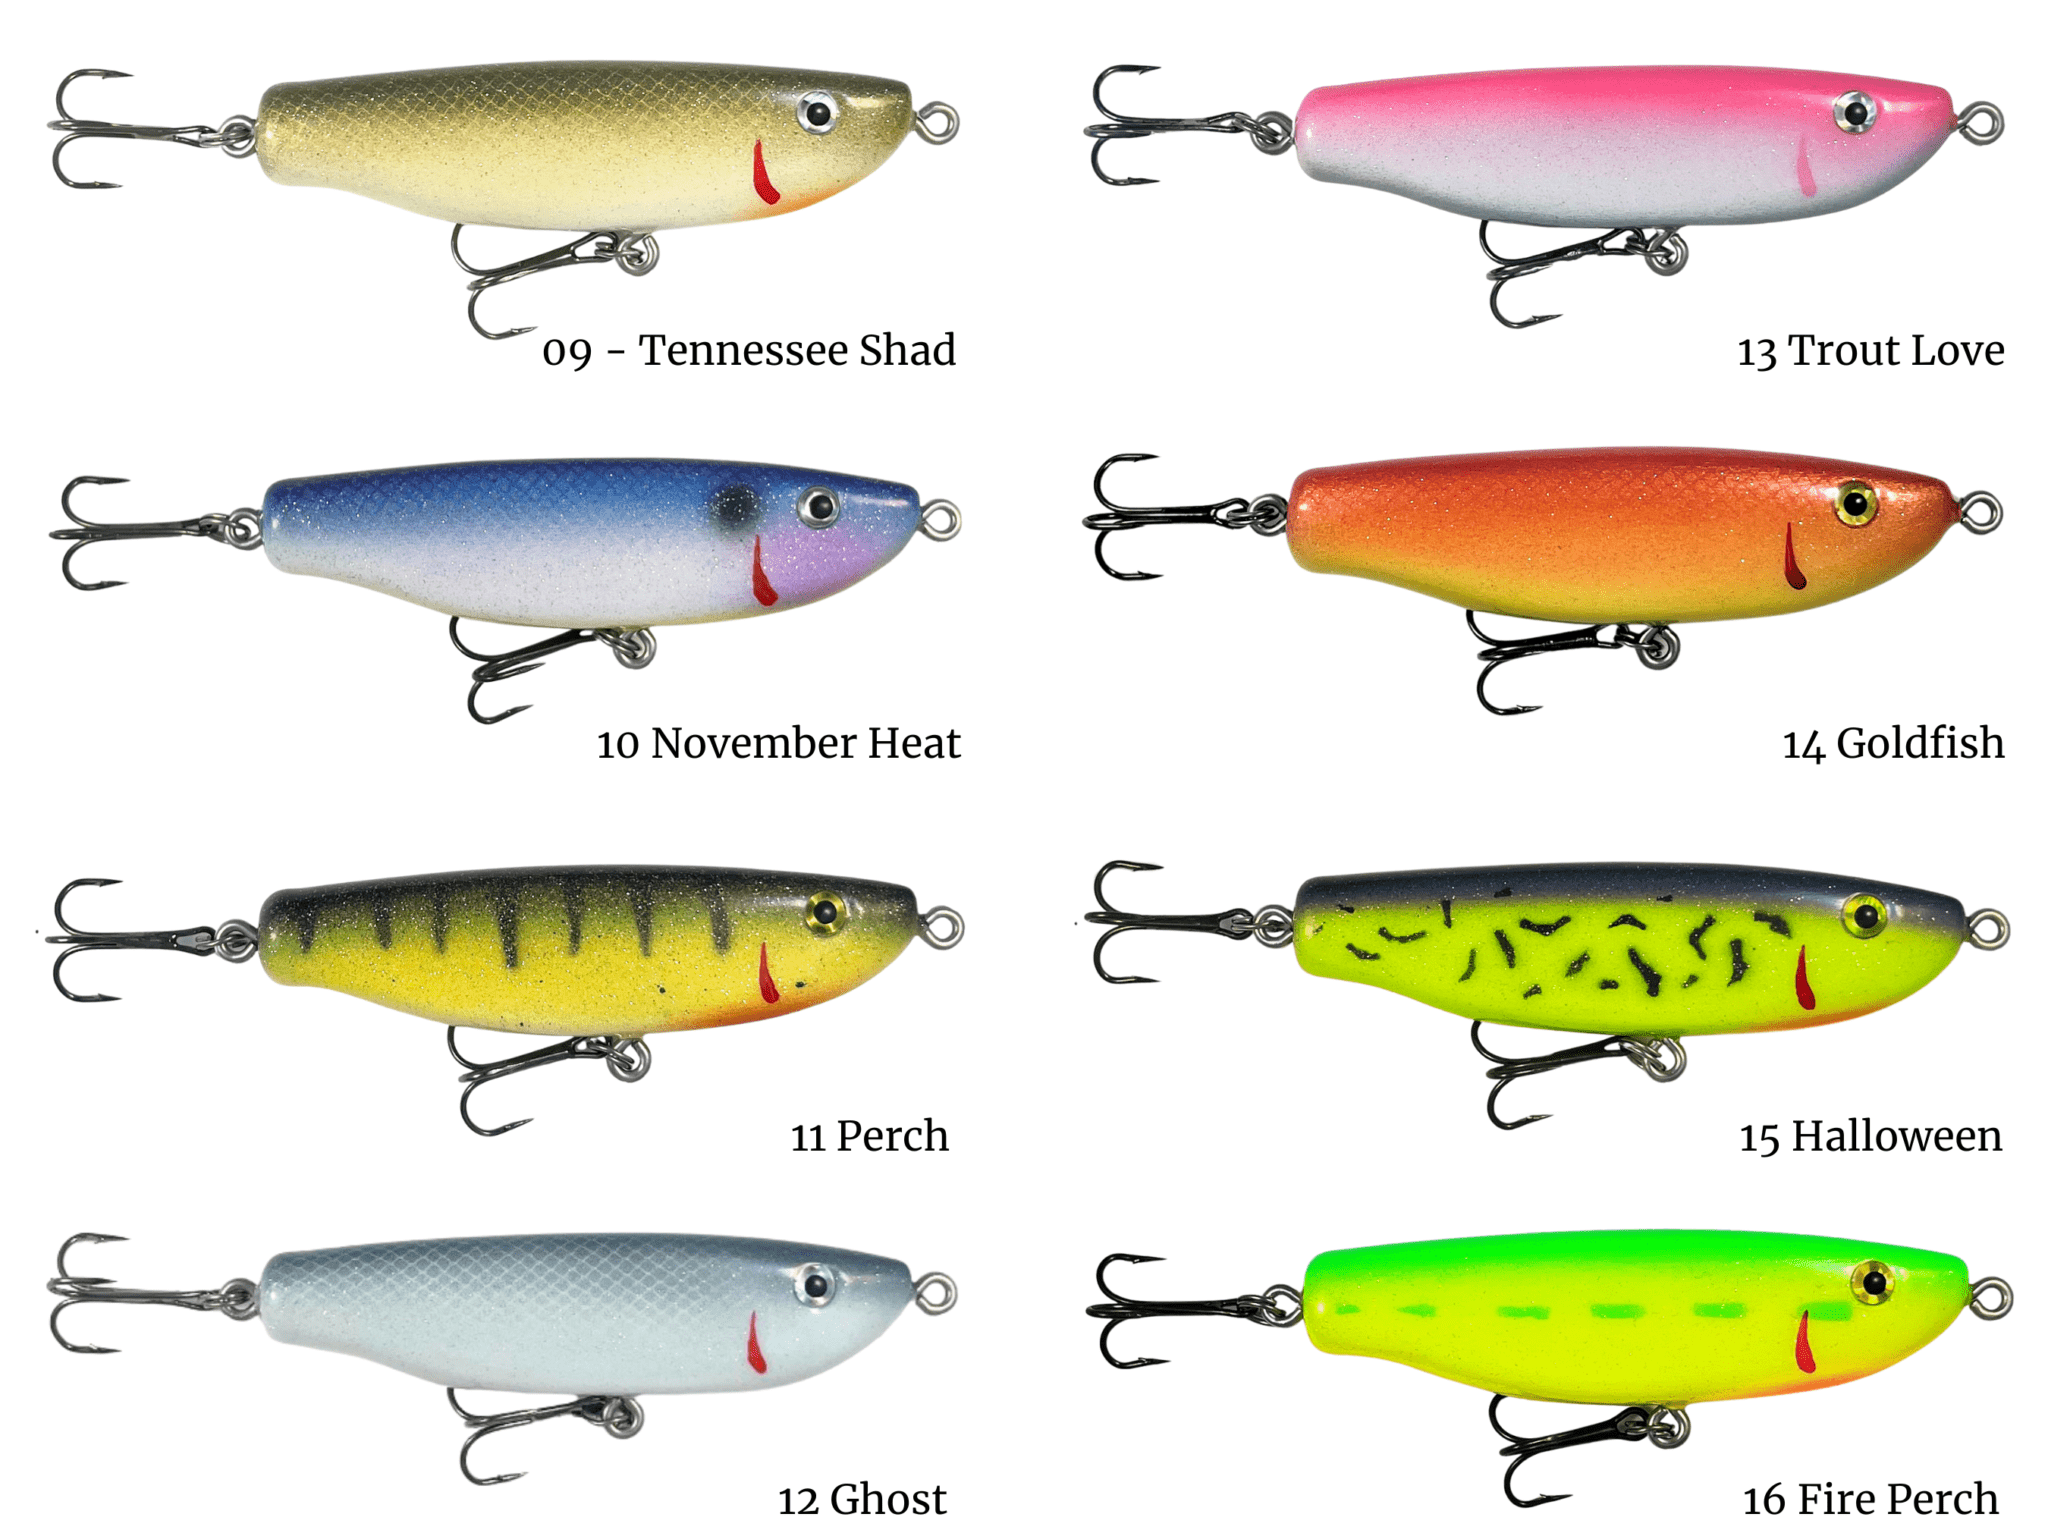 Lures 9-16